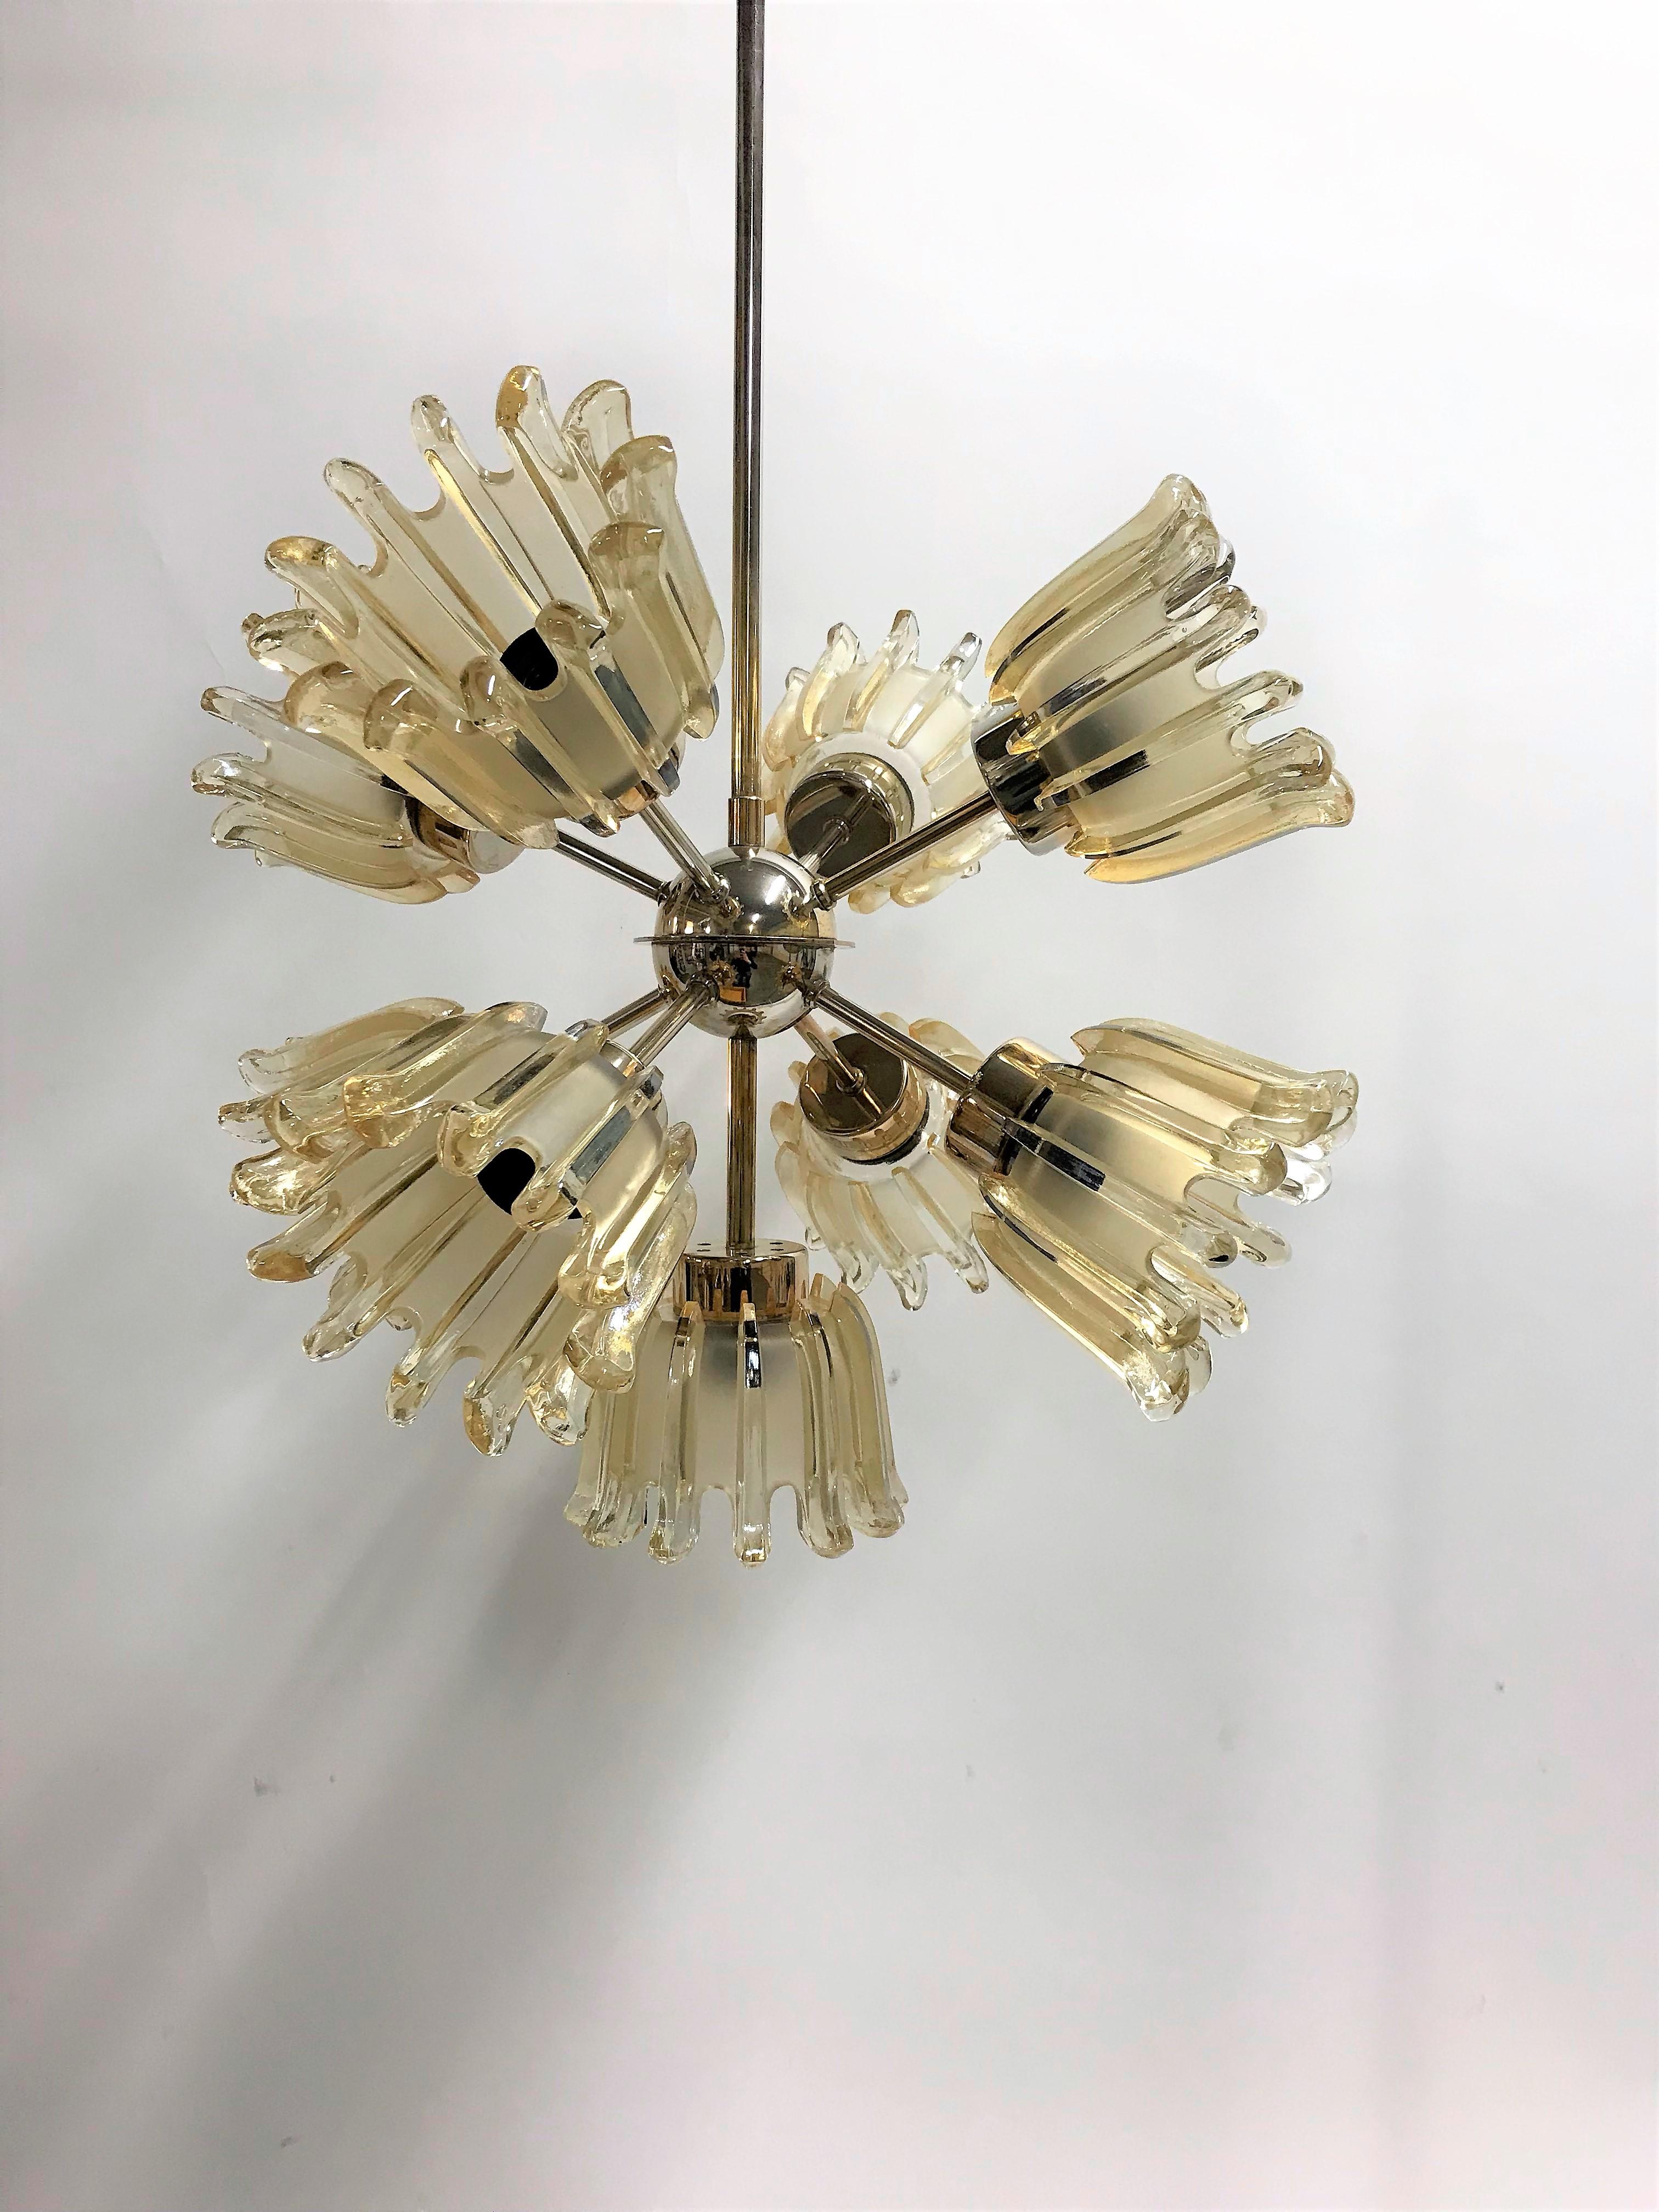 Wonderful brass tulip glass chandelier design by Doria Leuchten.

The Sputnik design was popular during the 1960s.

Subtitle size, suitable for smaller rooms.

The chandelier has nine light points.

Good condition, made from brass and